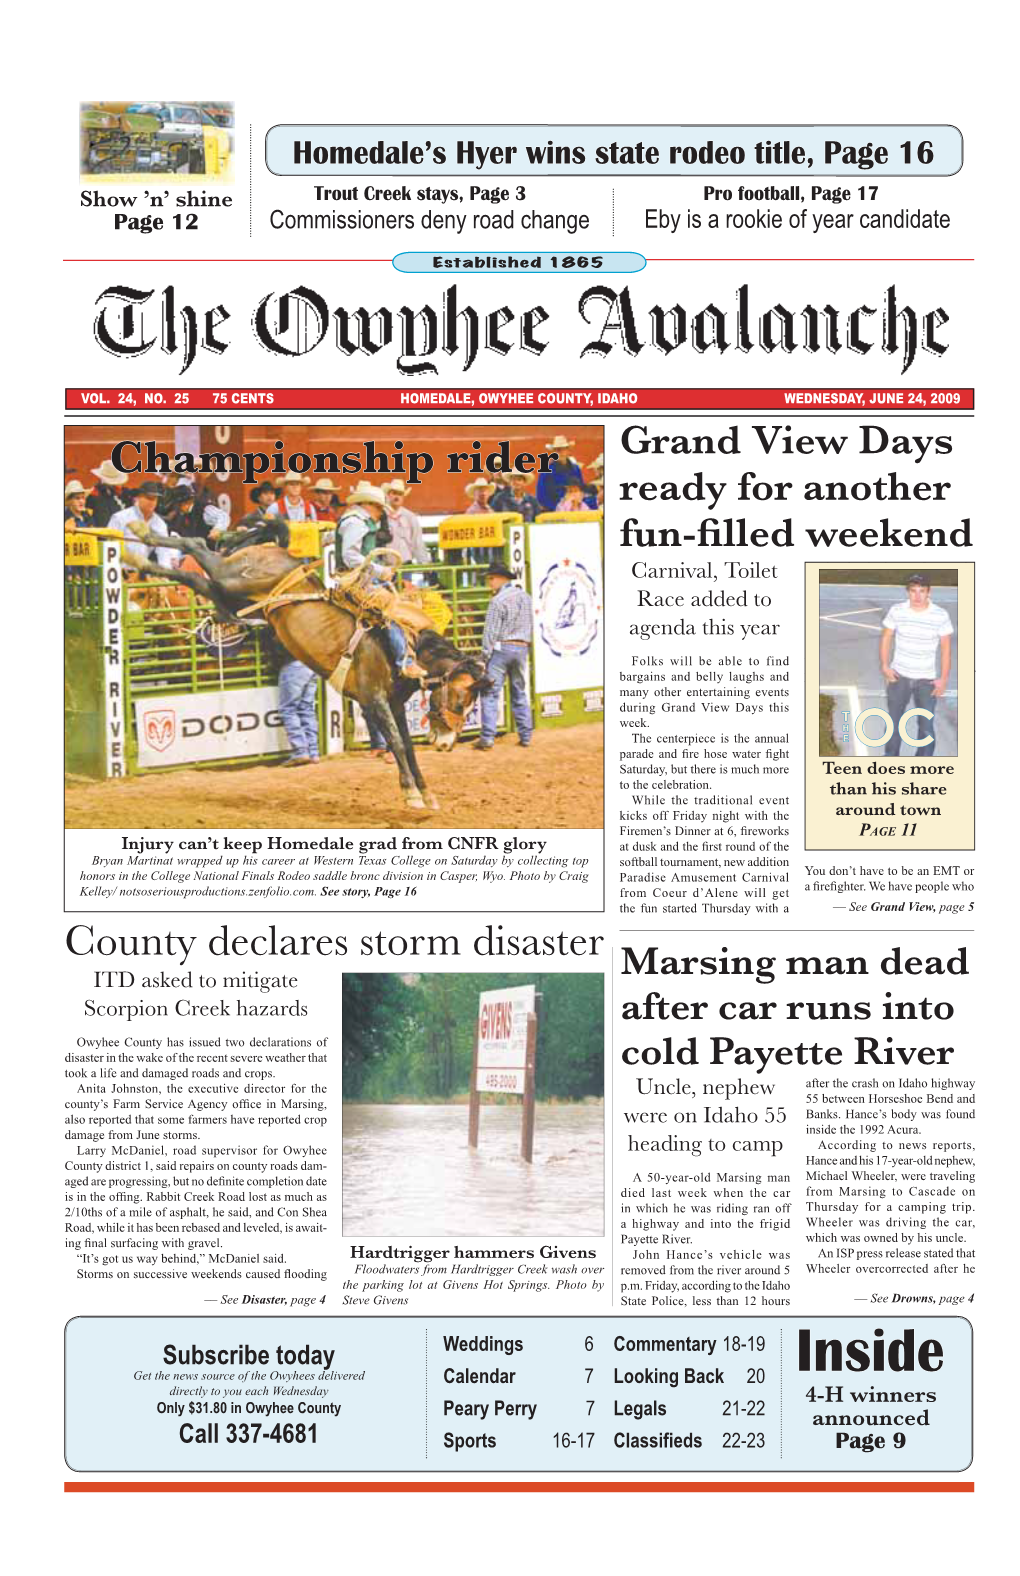 Homedale's Hyer Wins State Rodeo Title, Page 16